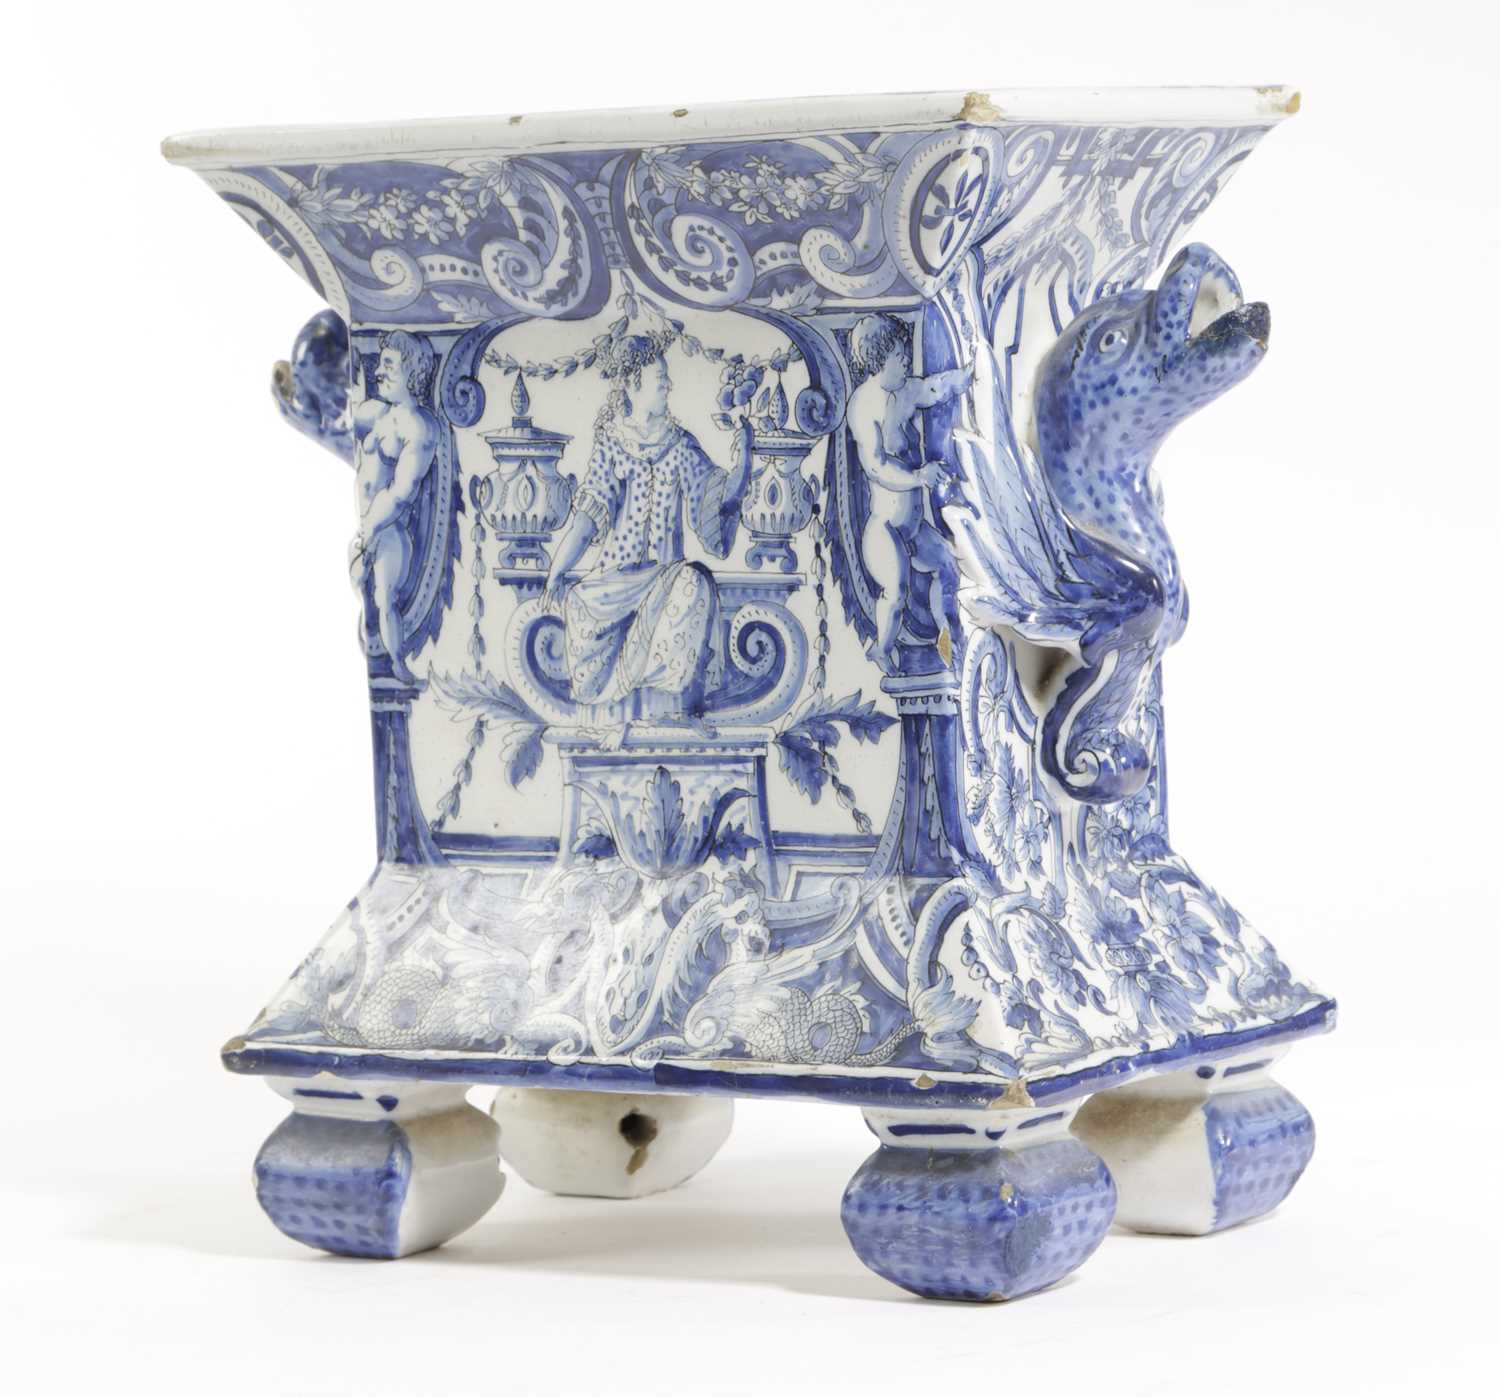 A LARGE DELFT POTTERY TULIPIÈRE STAND OR PEDESTAL 19TH CENTURY of rectangular form, well painted - Image 2 of 3